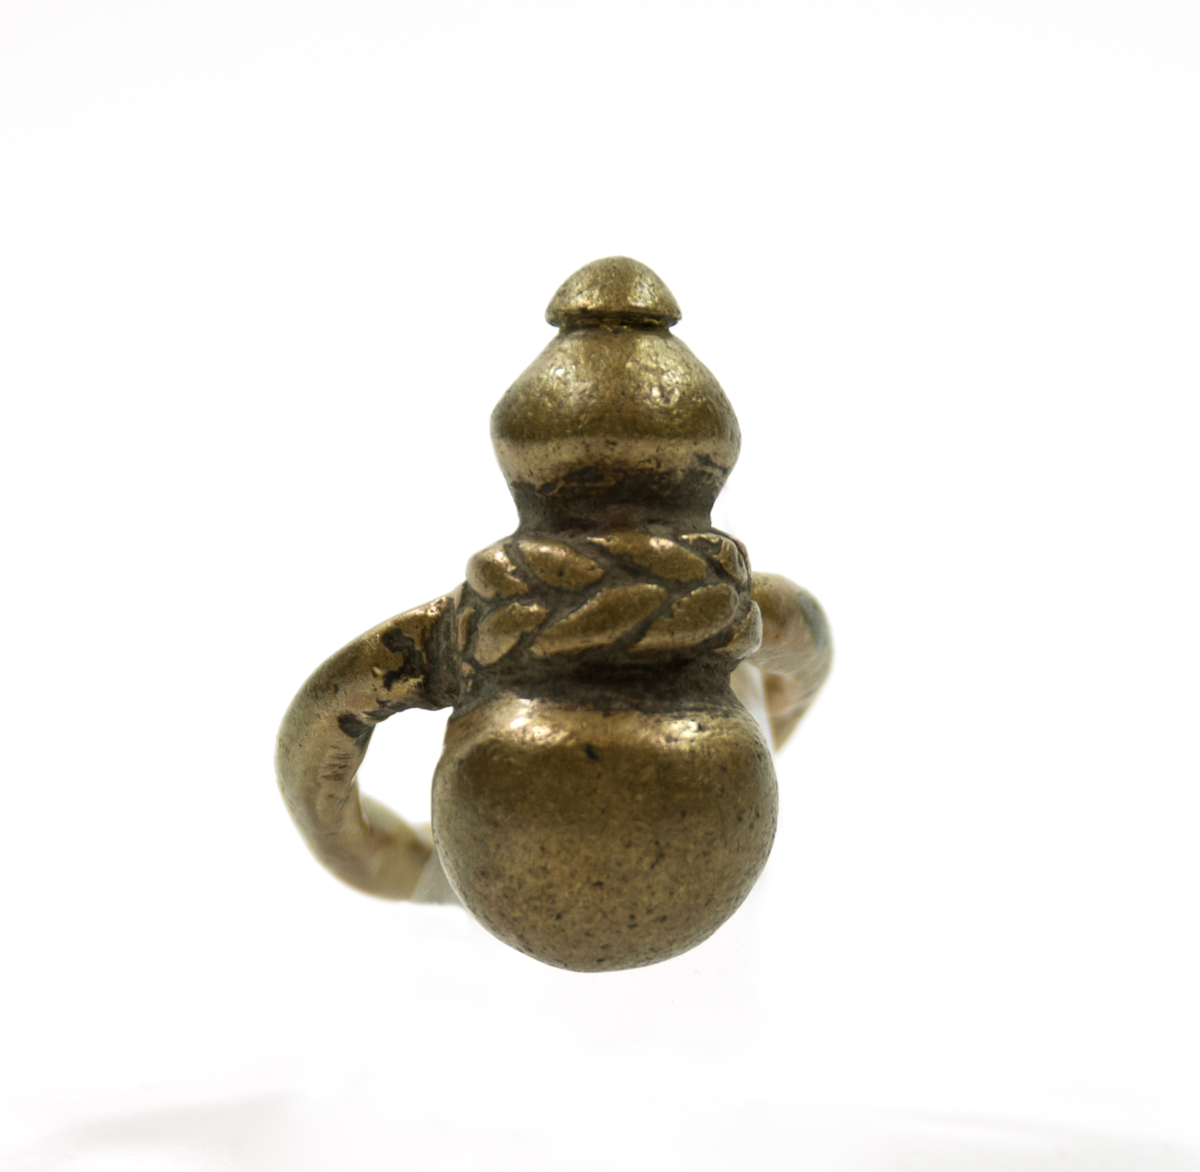 A brass ring with an ornament on the top of a calabash shape, with a plaited pattern around the middle, representing a pot for medicine.